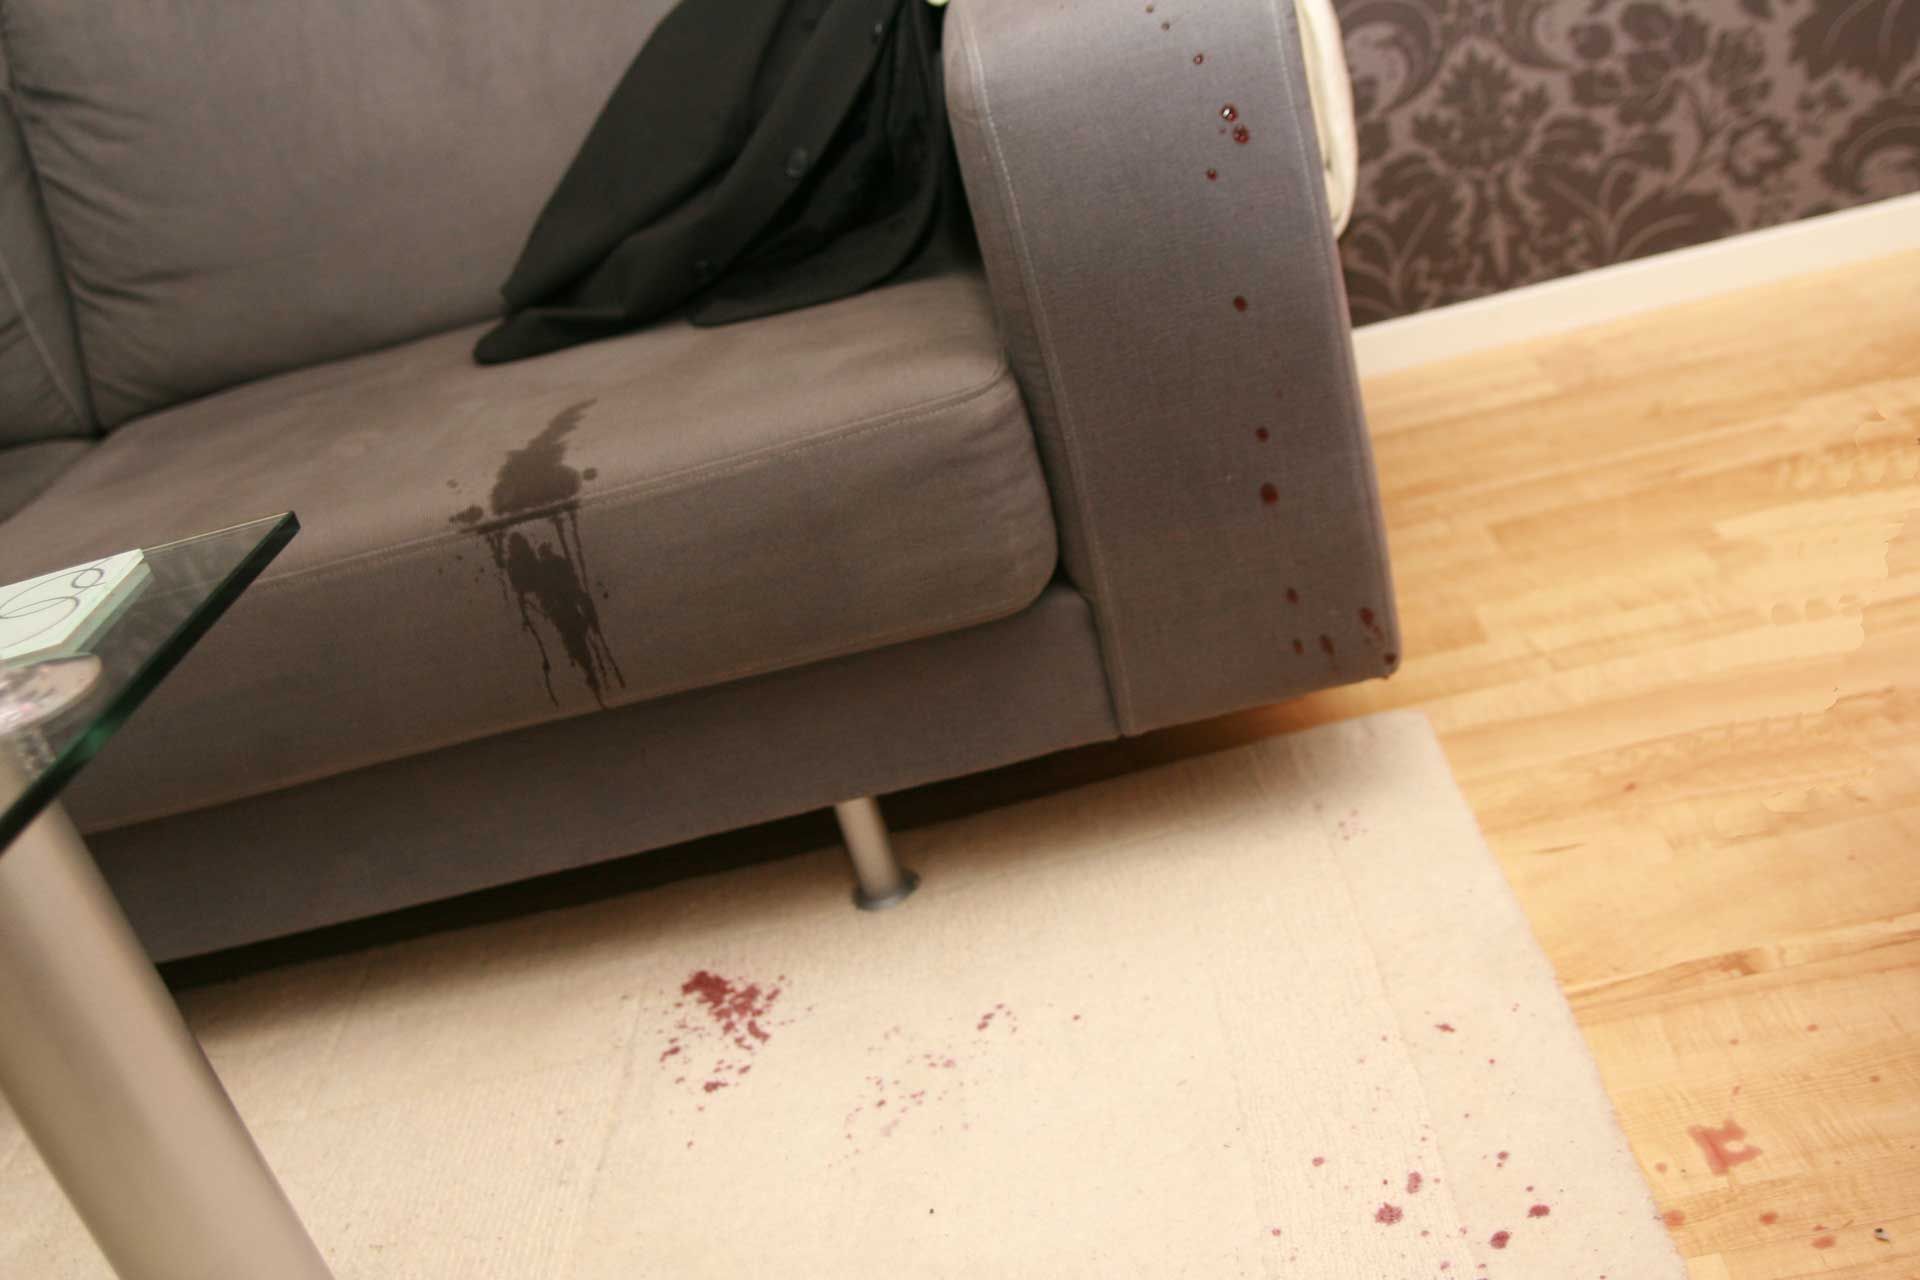 Spilled Drink On Couch